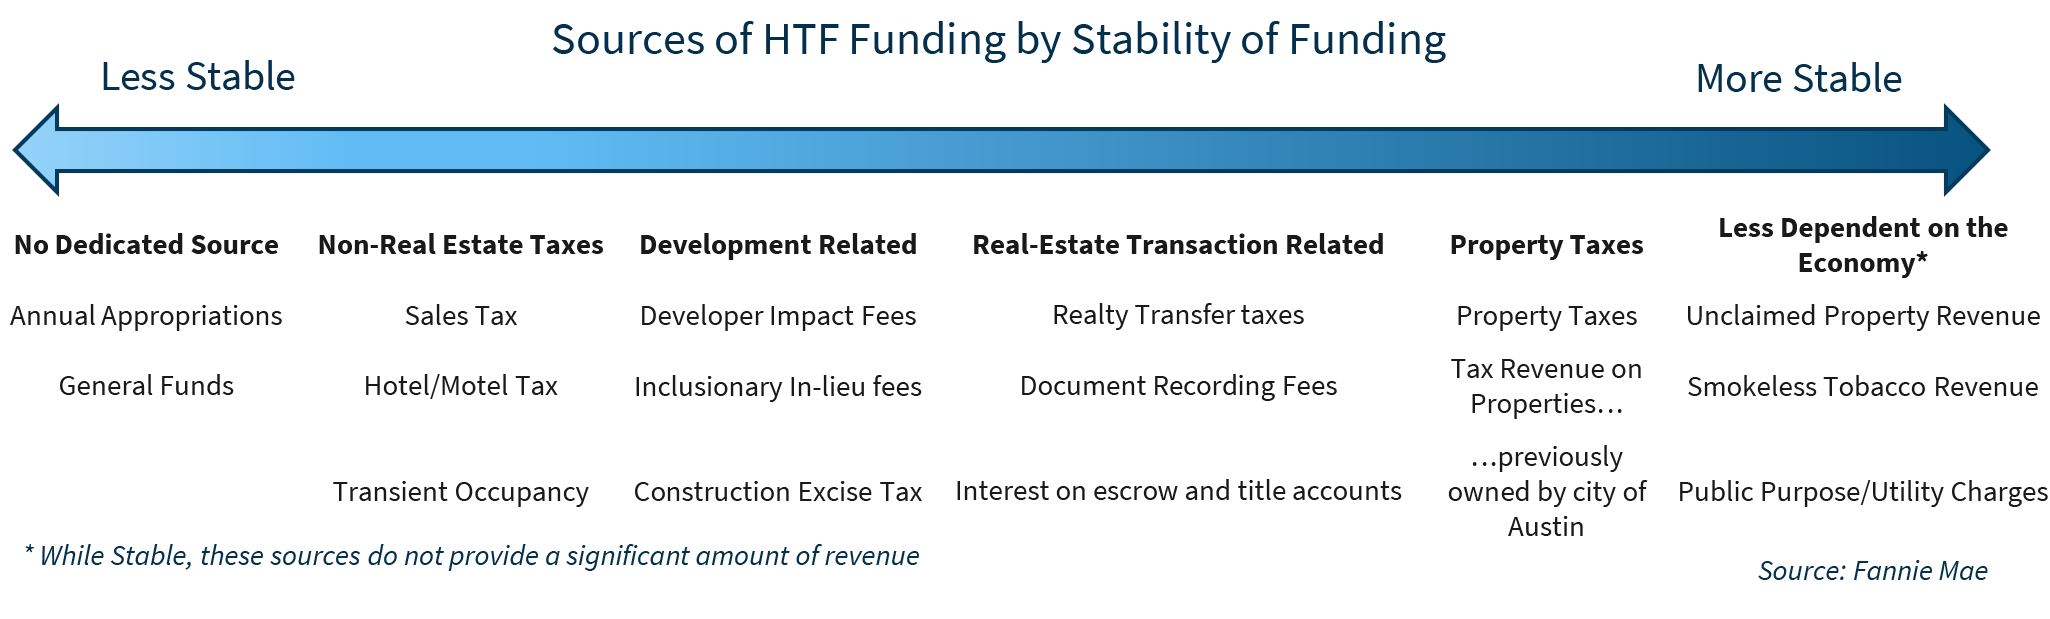 Sources of HTF Funding by Stability of Funding